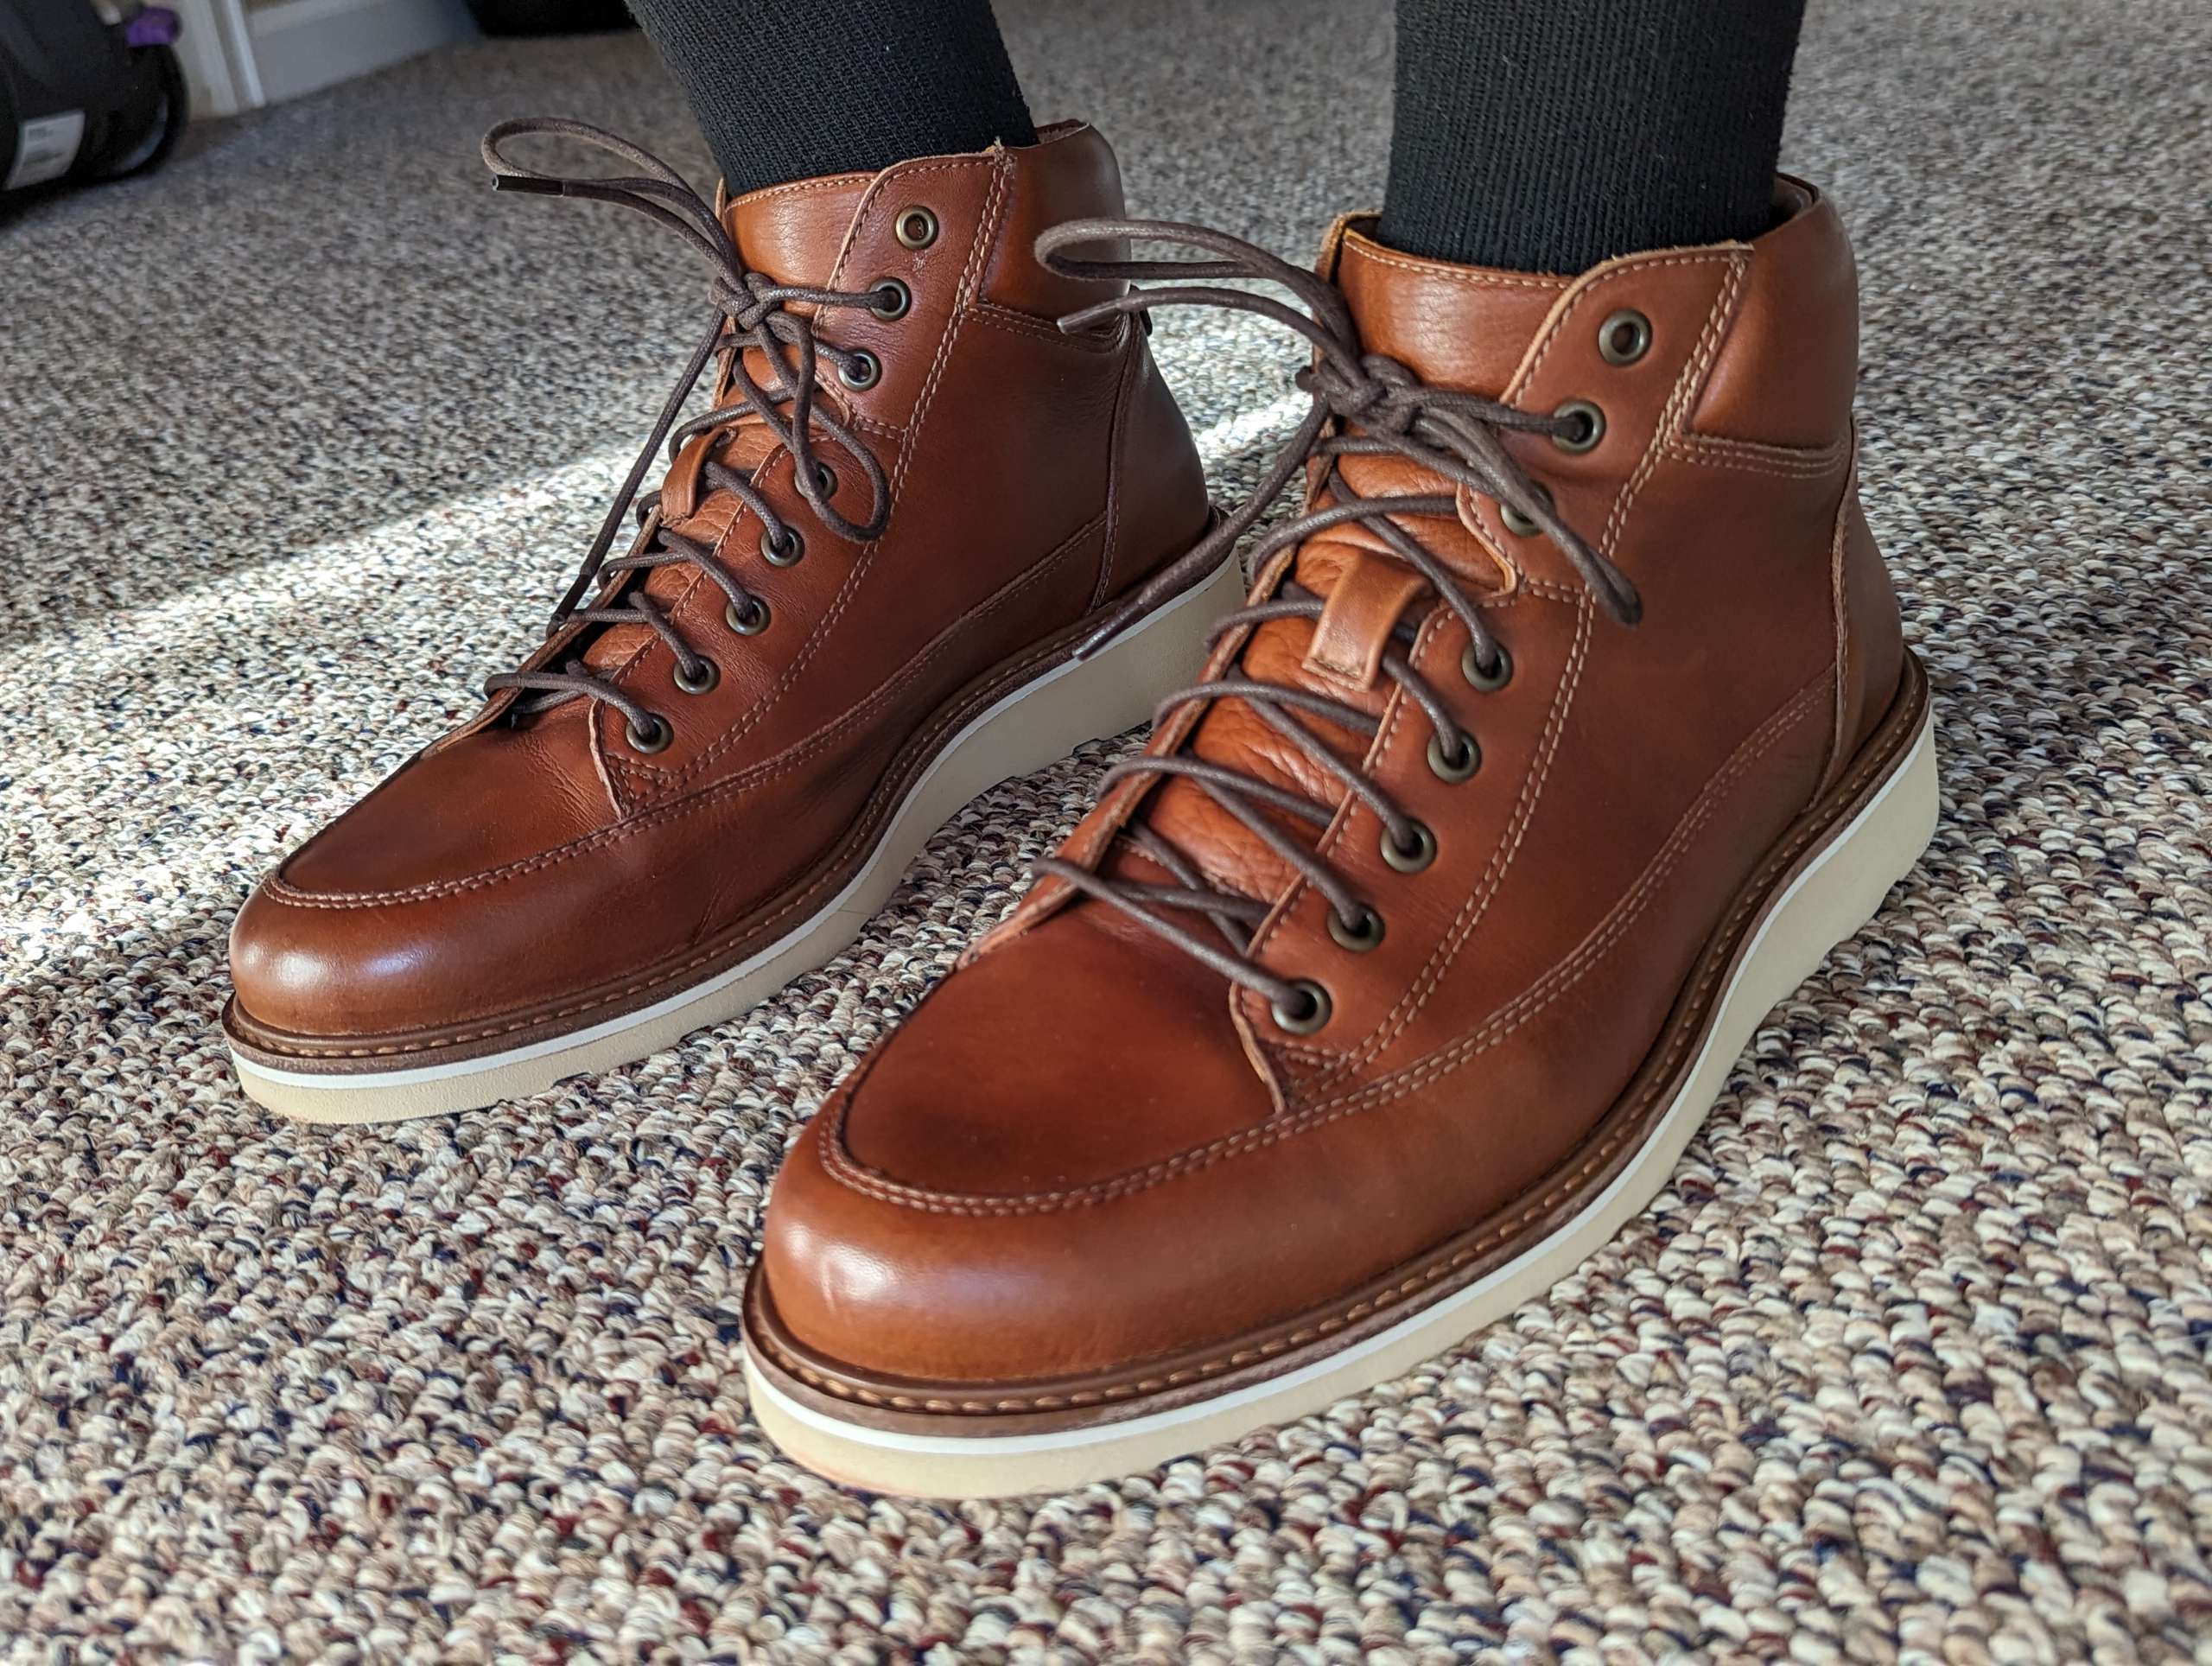 Helm Calistoga Whiskey Boots review - handmade quality, class, and ...